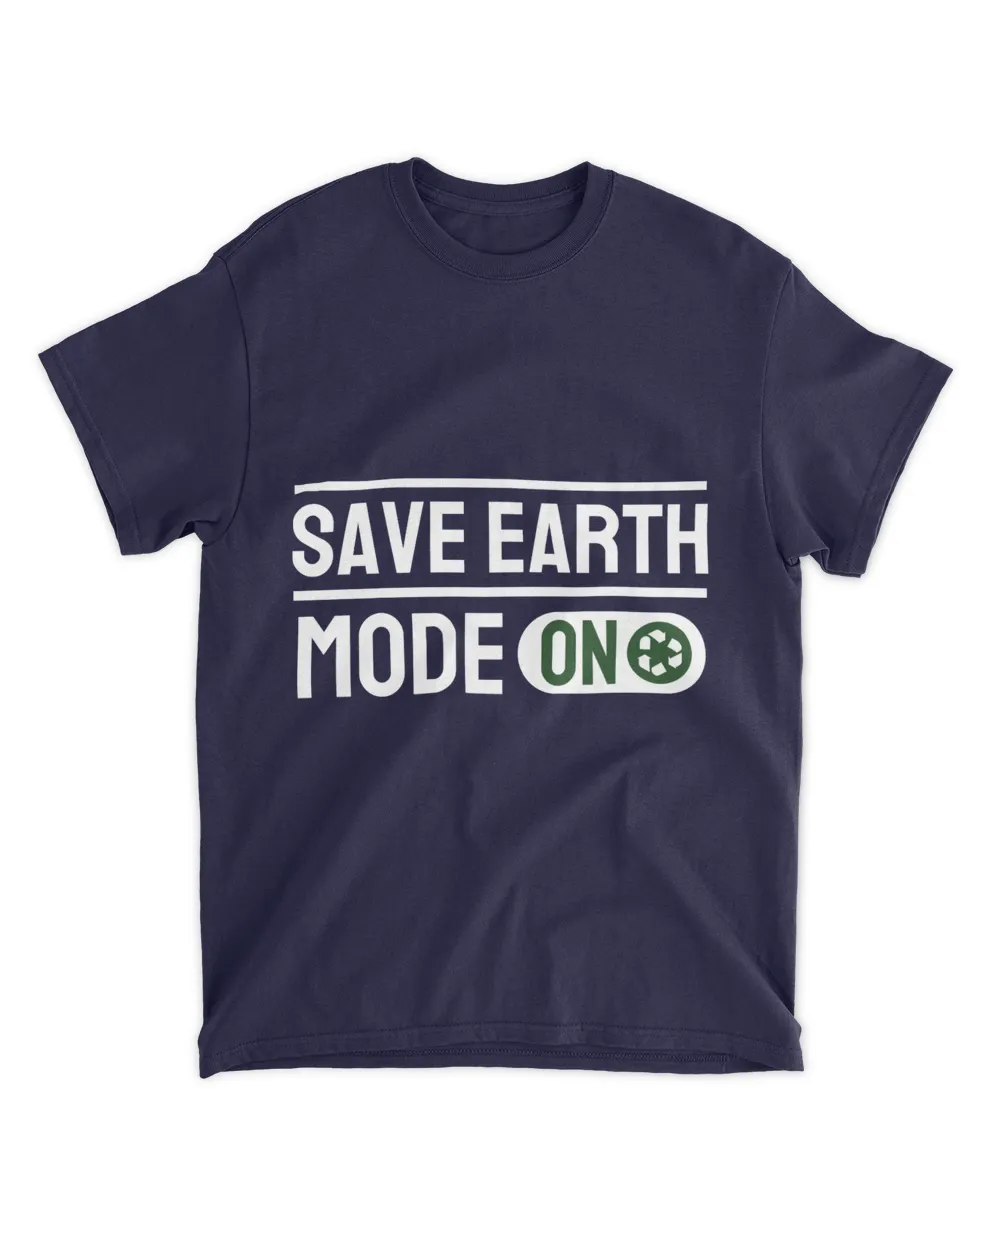 Save Earth Mode On (Earth Day Slogan T-Shirt)